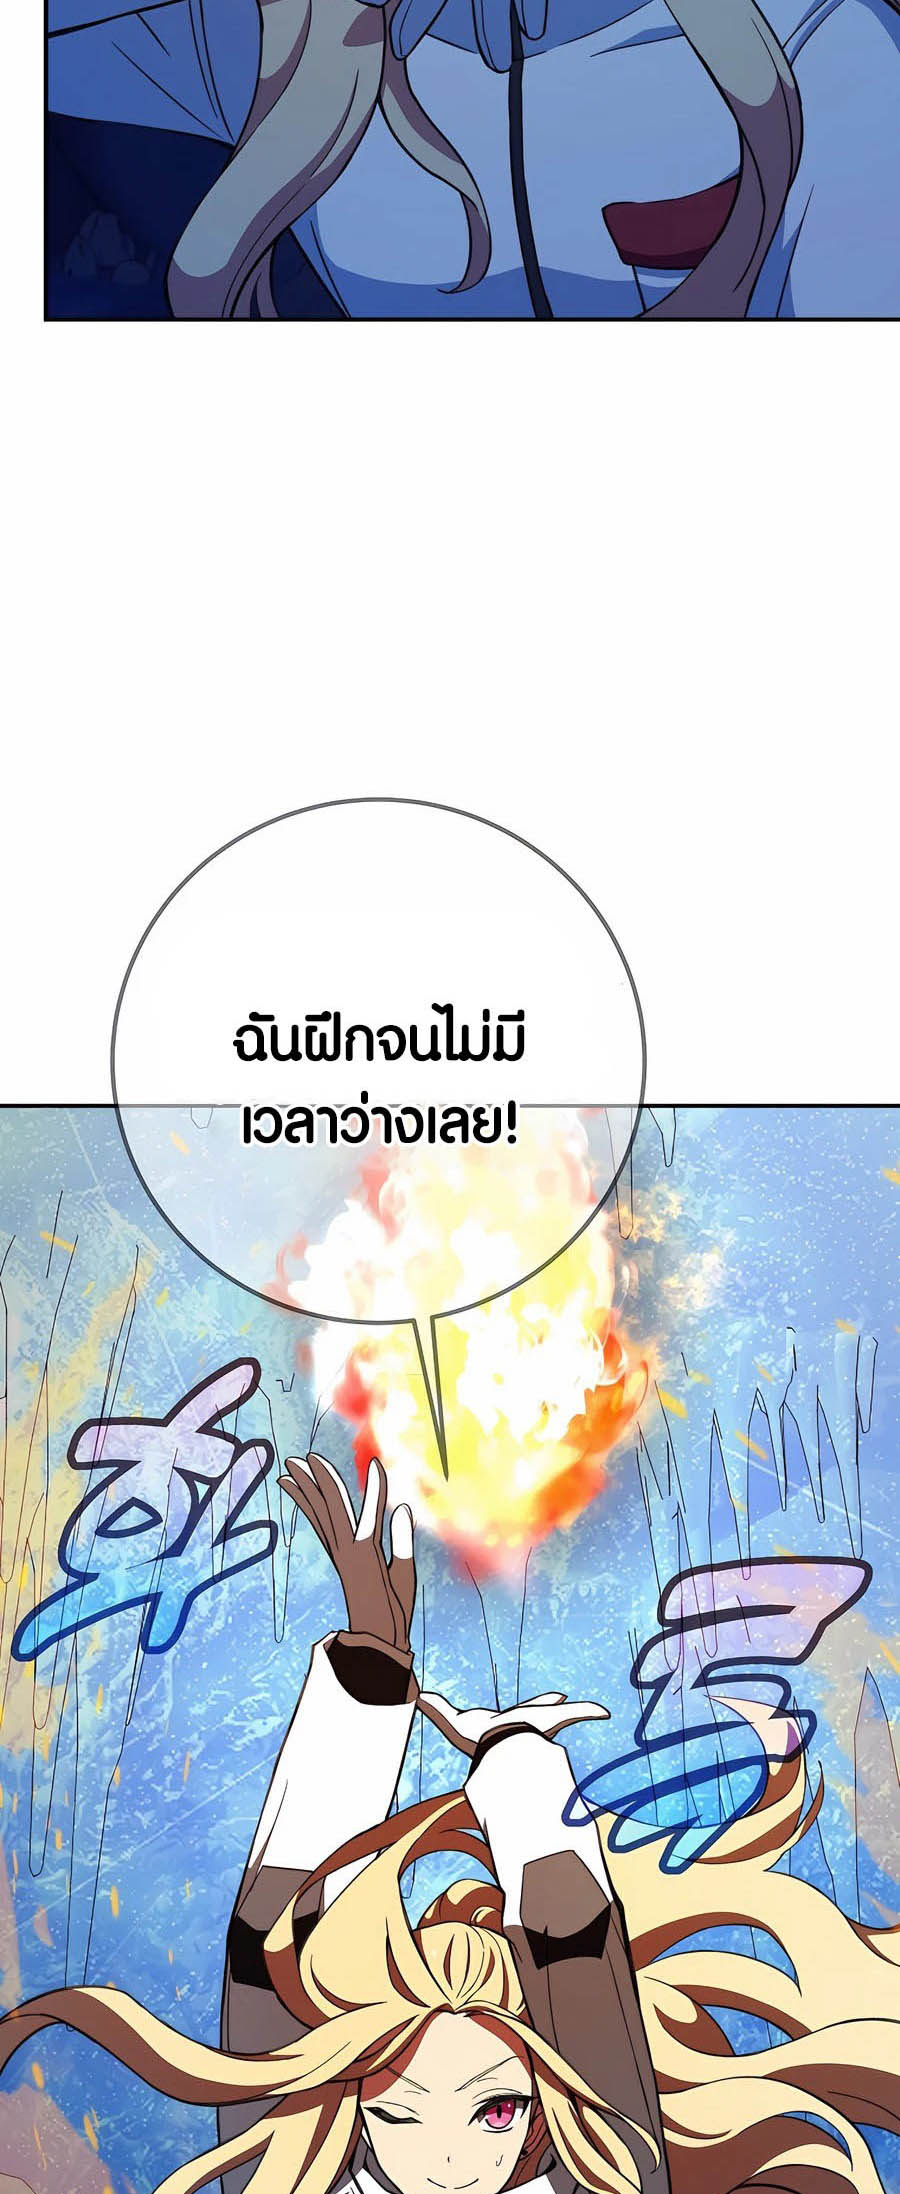 à¸­à¹ˆà¸²à¸™à¸¡à¸±à¸™à¸®à¸§à¸² à¹€à¸£à¸·à¹ˆà¸­à¸‡ The Part Time Land of the Gods 57 48